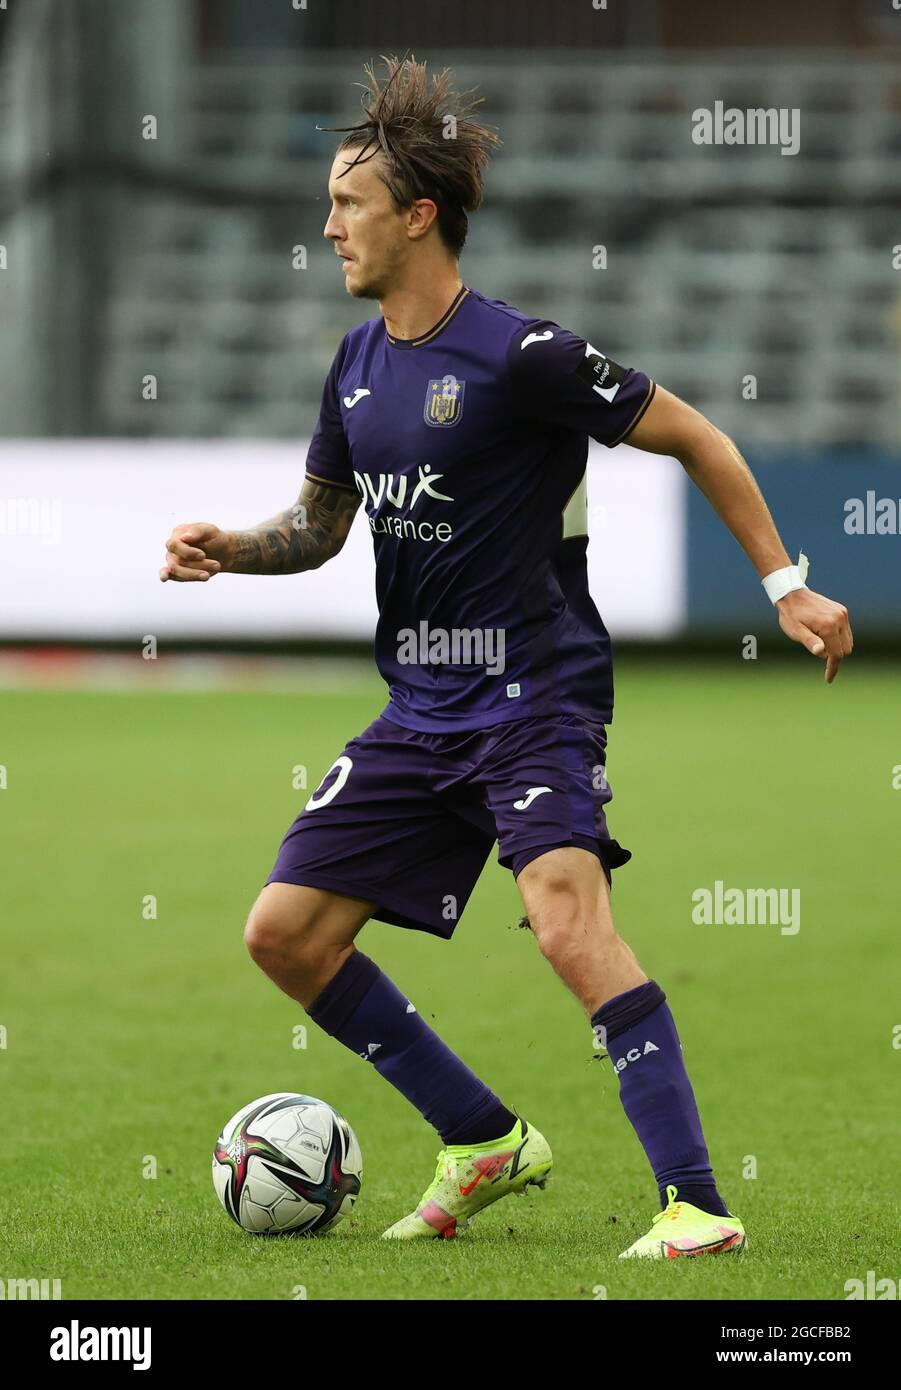 Anderlecht's Kristoffer Olsson and Club's Noa Lang fight for the ball  during a soccer match between RSC Anderlecht and Club Brugge KV, Sunday 03  Octob Stock Photo - Alamy